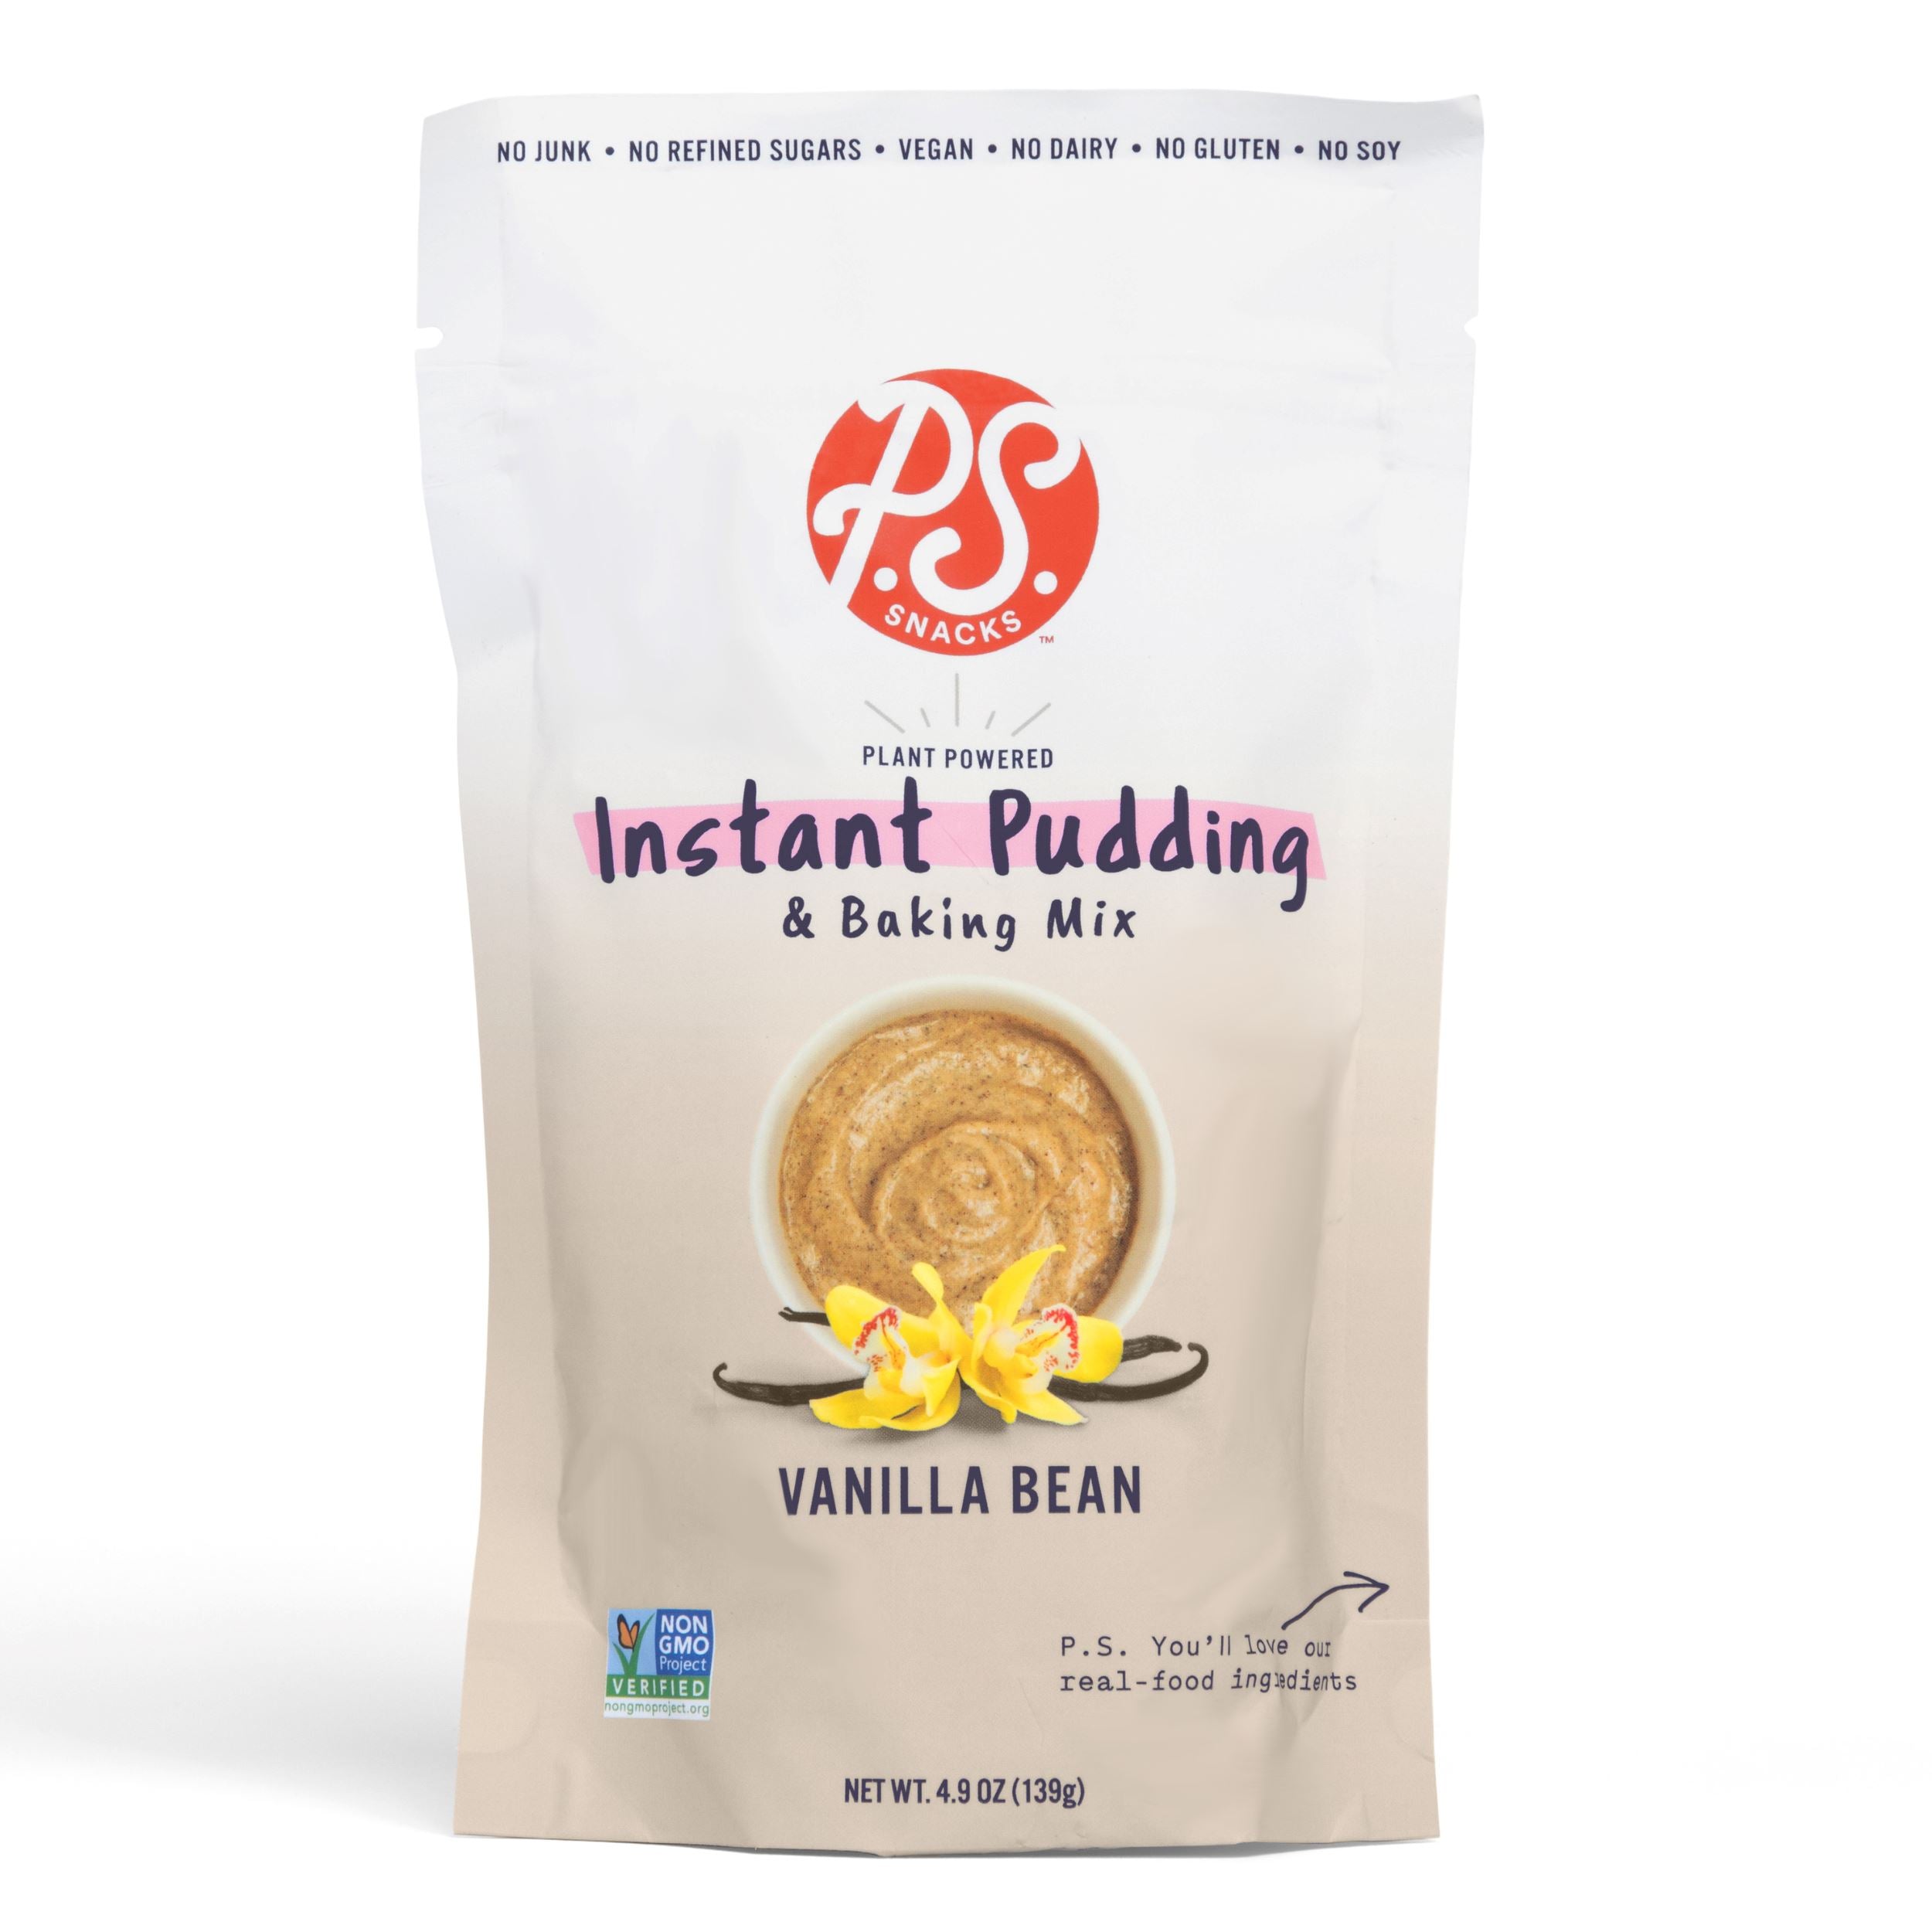 Instant Pudding Instant Pudding ps-snacks Vanilla Bean (6-Pack) 